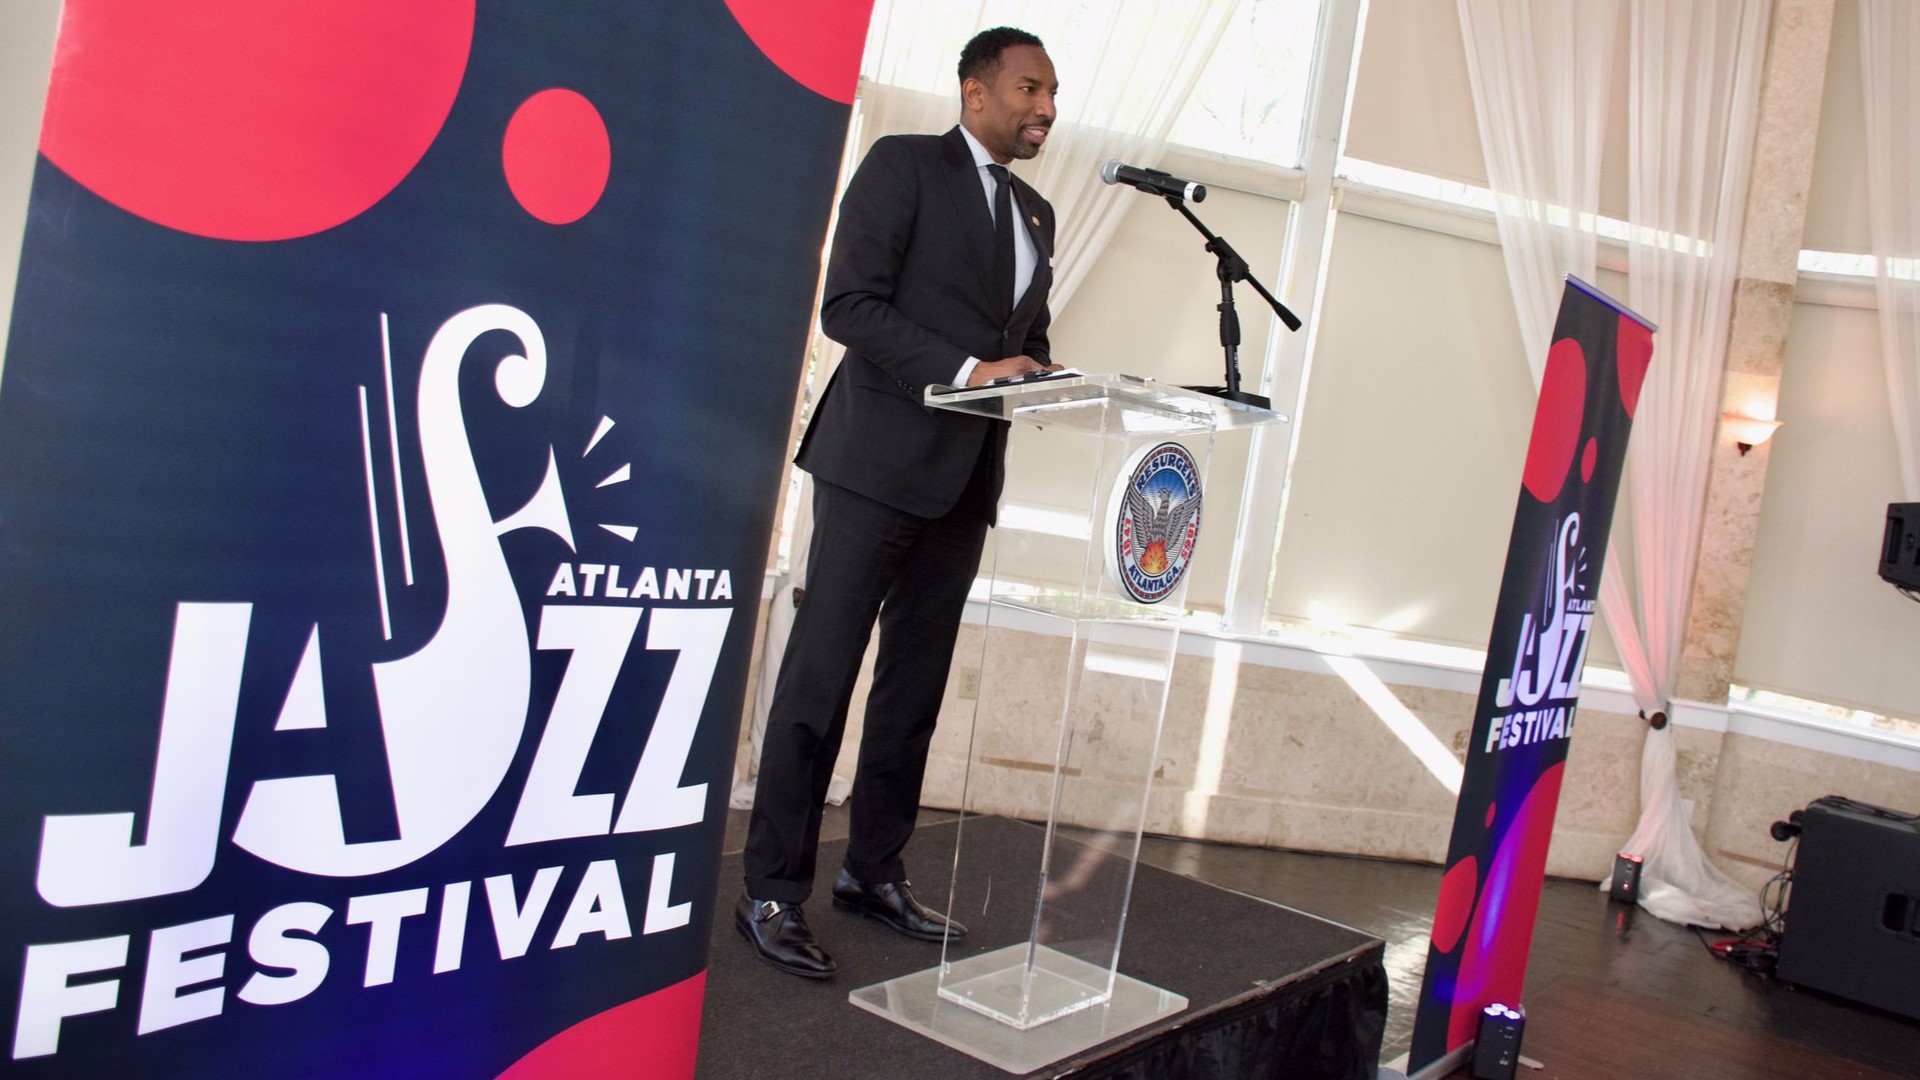 The 45th annual Jazz Fest is set to take place in Piedmont Park over Memorial Day weekend.